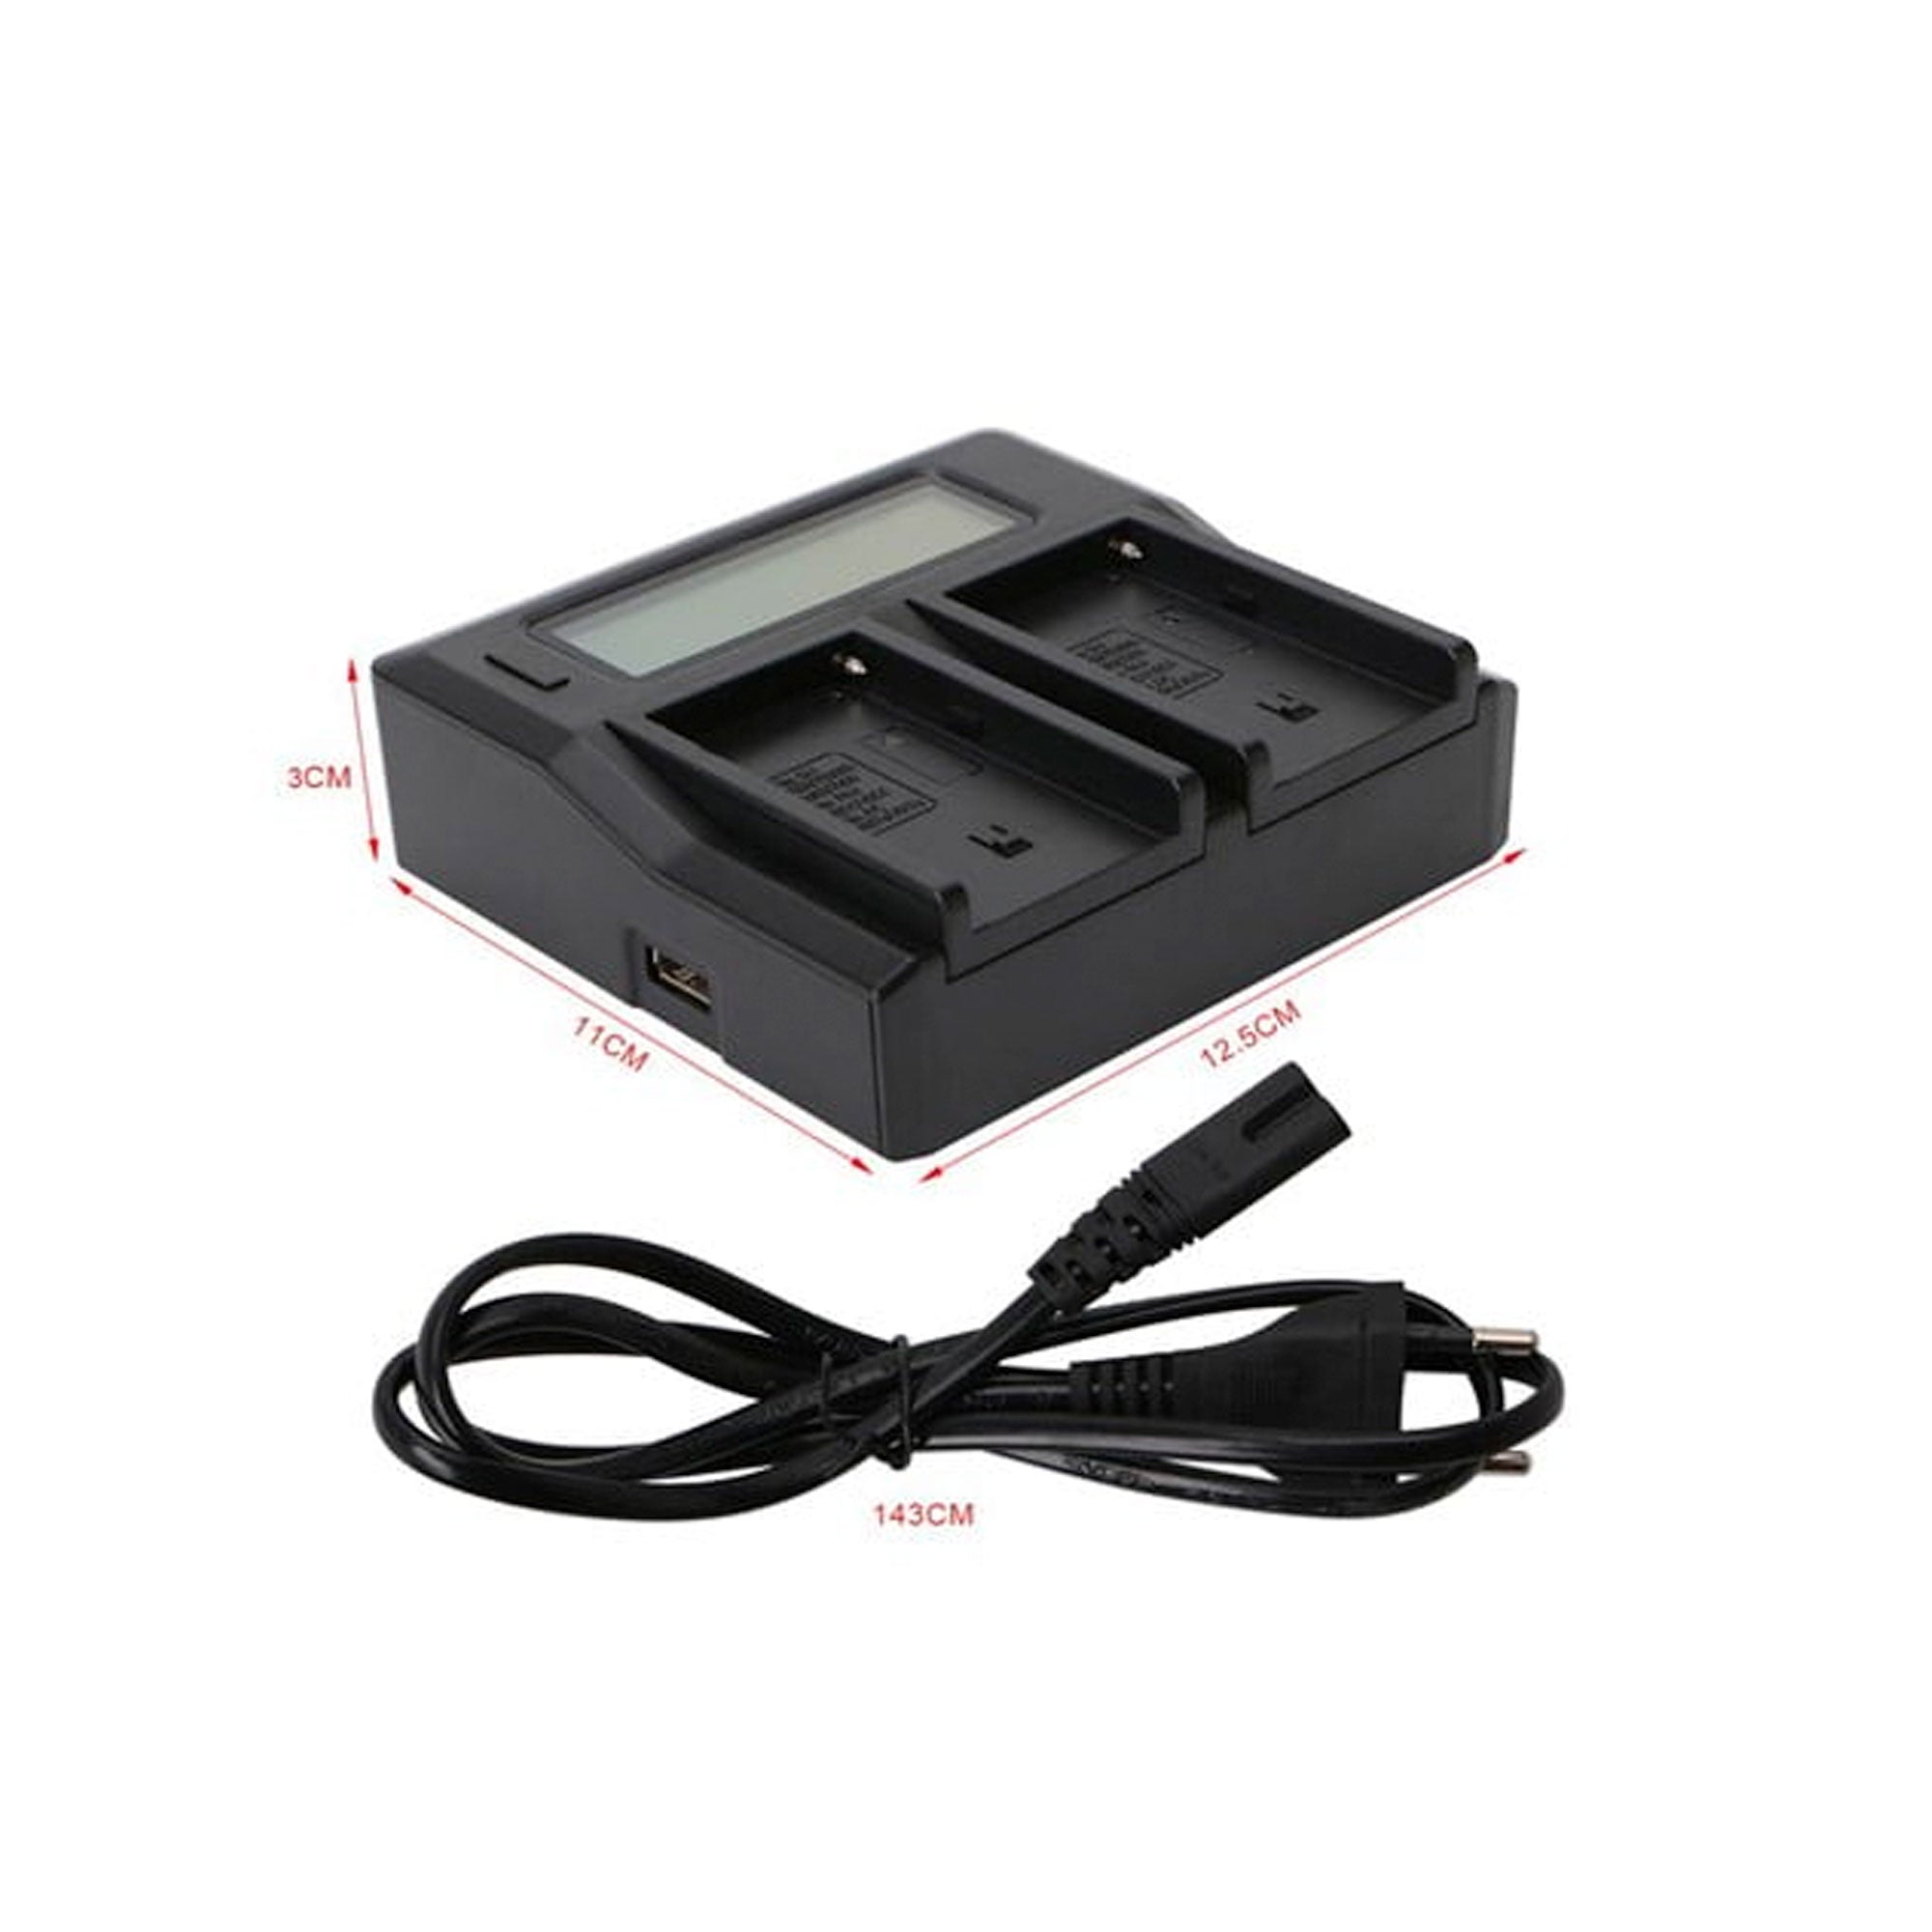 GPB Dual Charger with LCD Display for Sony NP-F550 NP-F750 NP-F970 Batteries